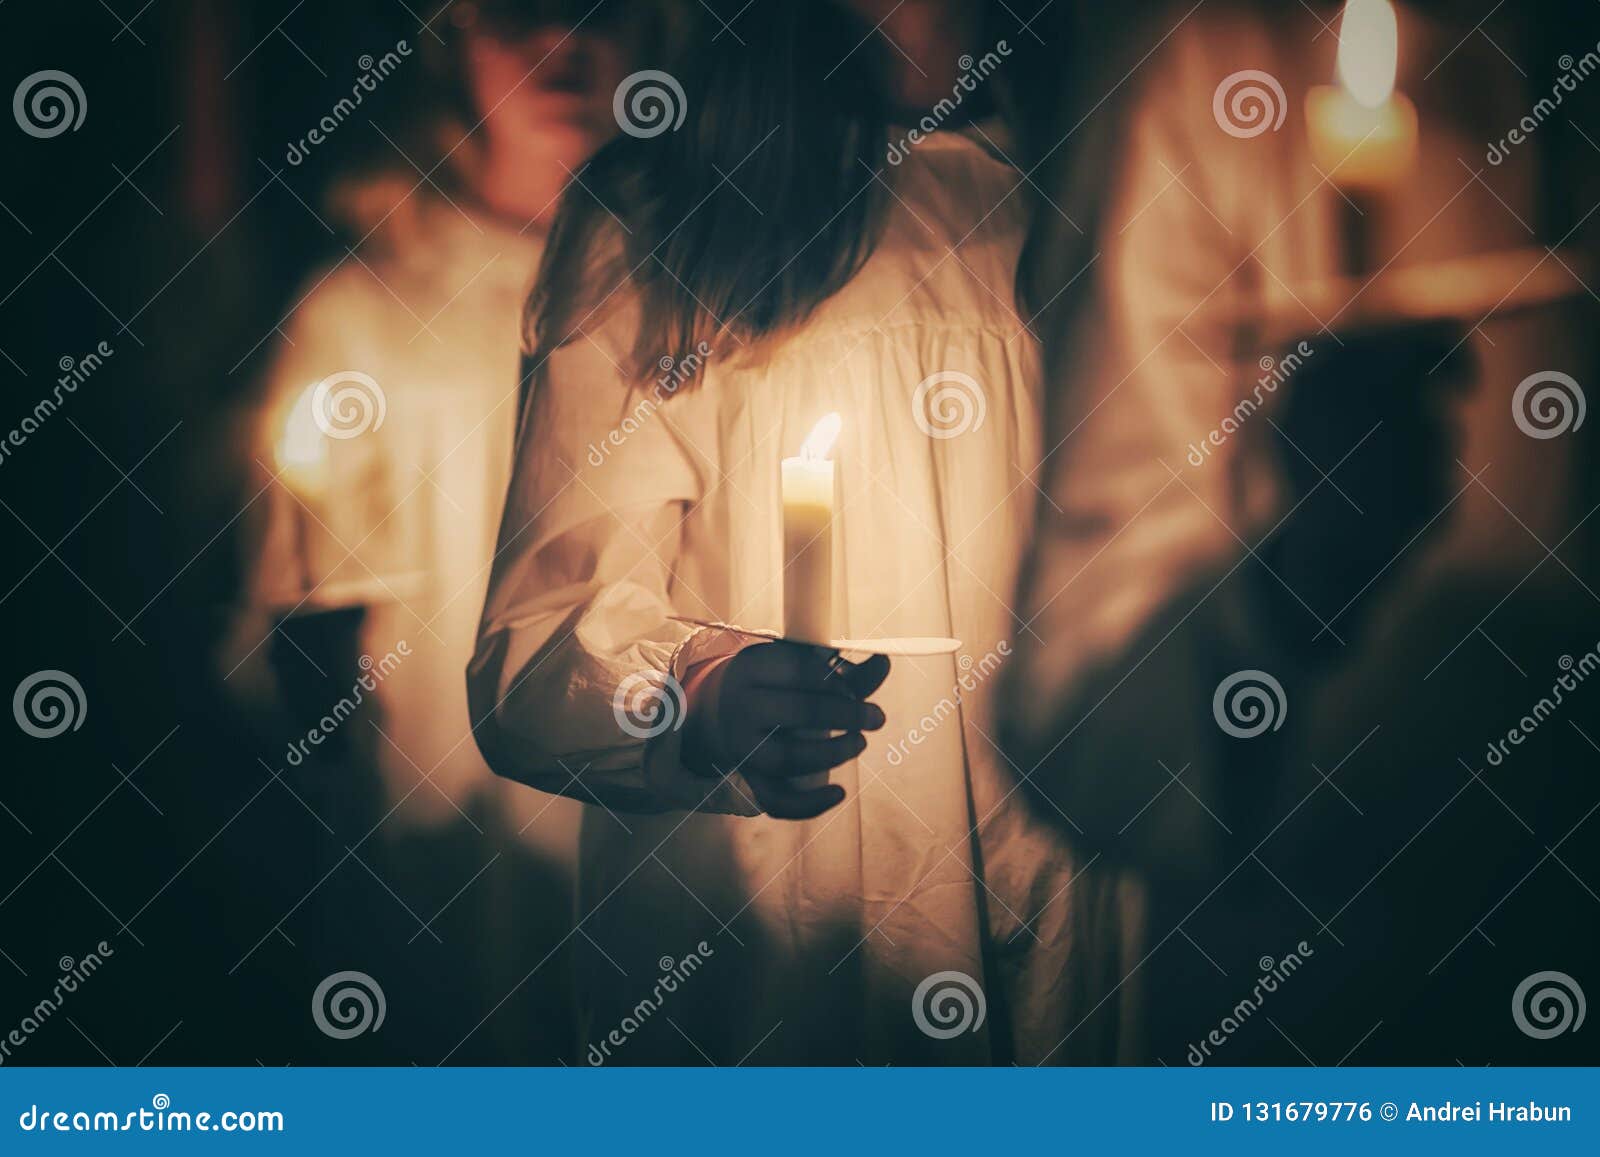 kids are handling candles in the traditionall dresses. celebration of lucia day in sweden